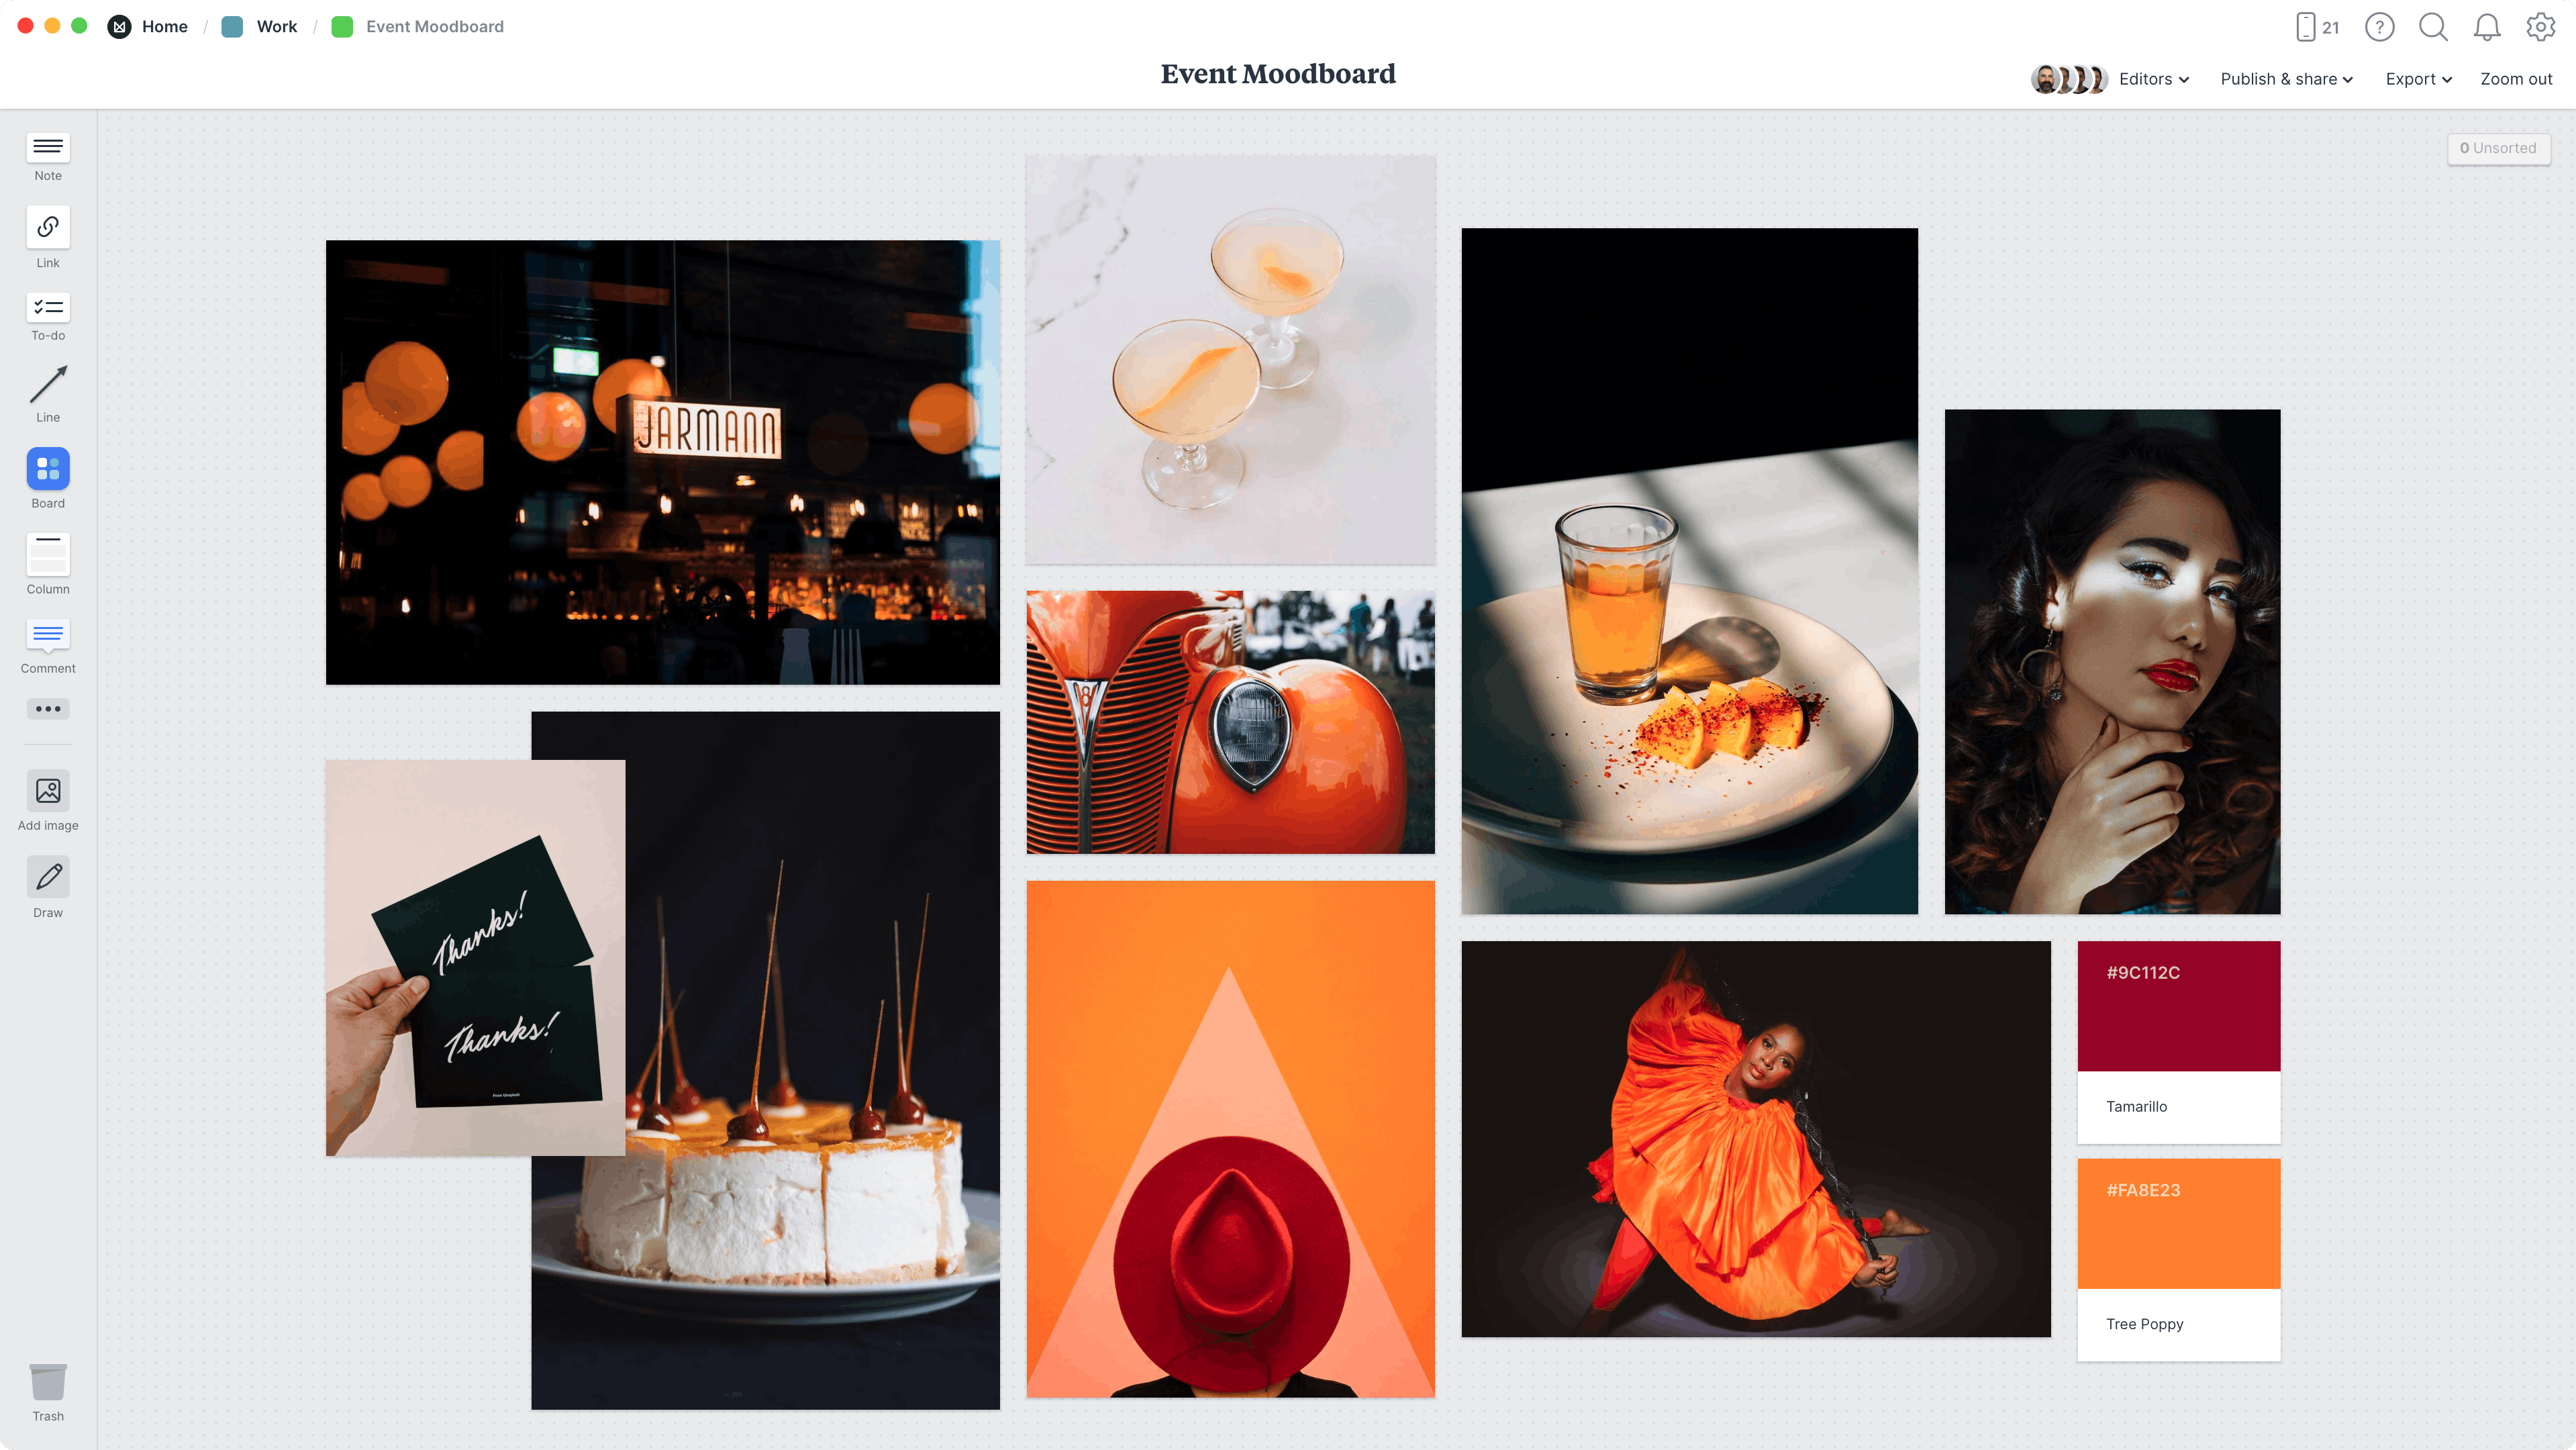 Event Moodboard Template, within the Milanote app